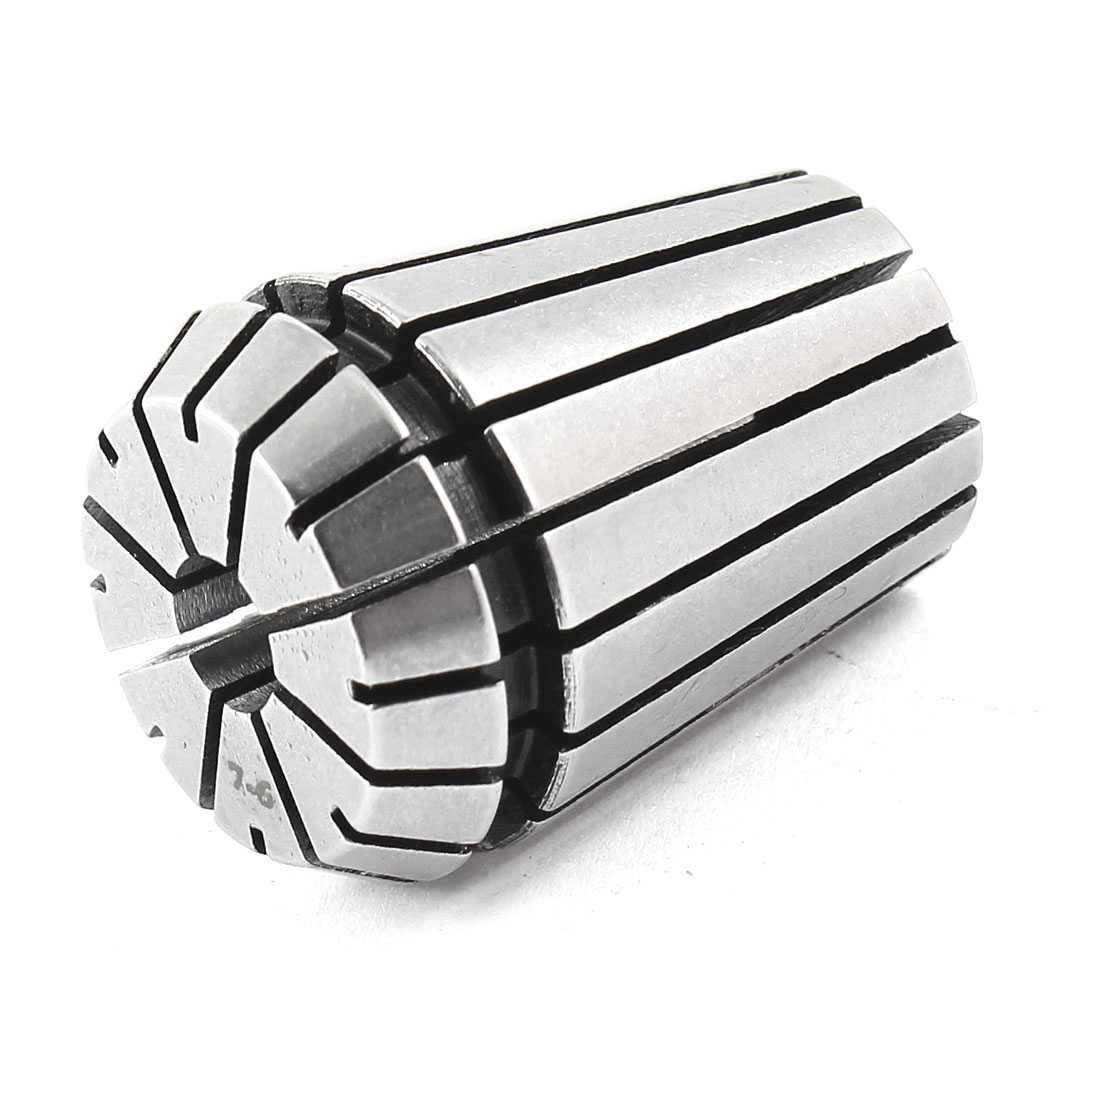 Stainless Steel 0.28' Dia Precision Spring Collect Socket Milling Tool